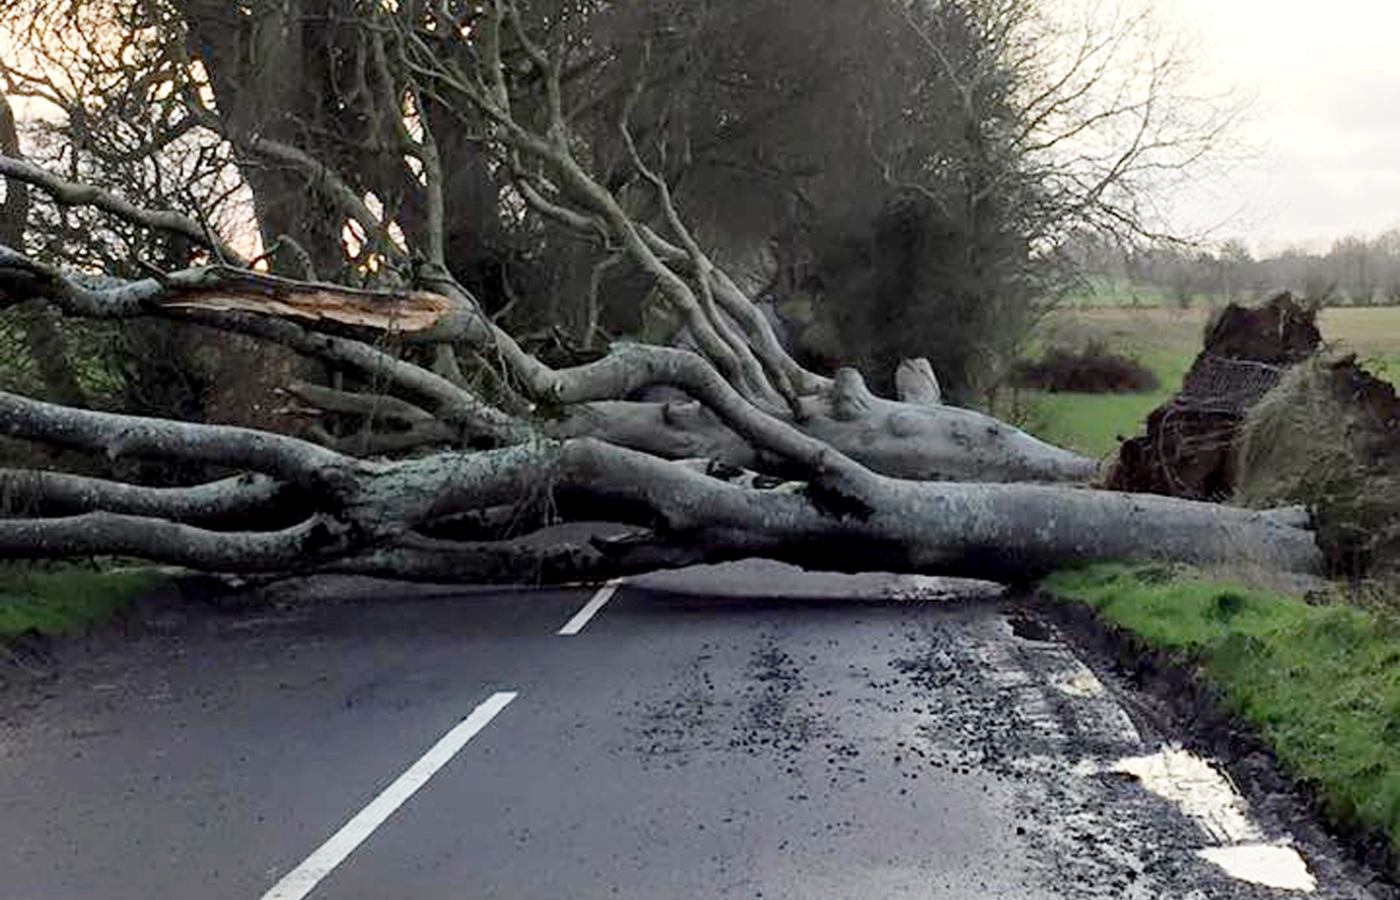 A number of the trees have been blown down by storms in recent years (Darren McNaughton/PA)